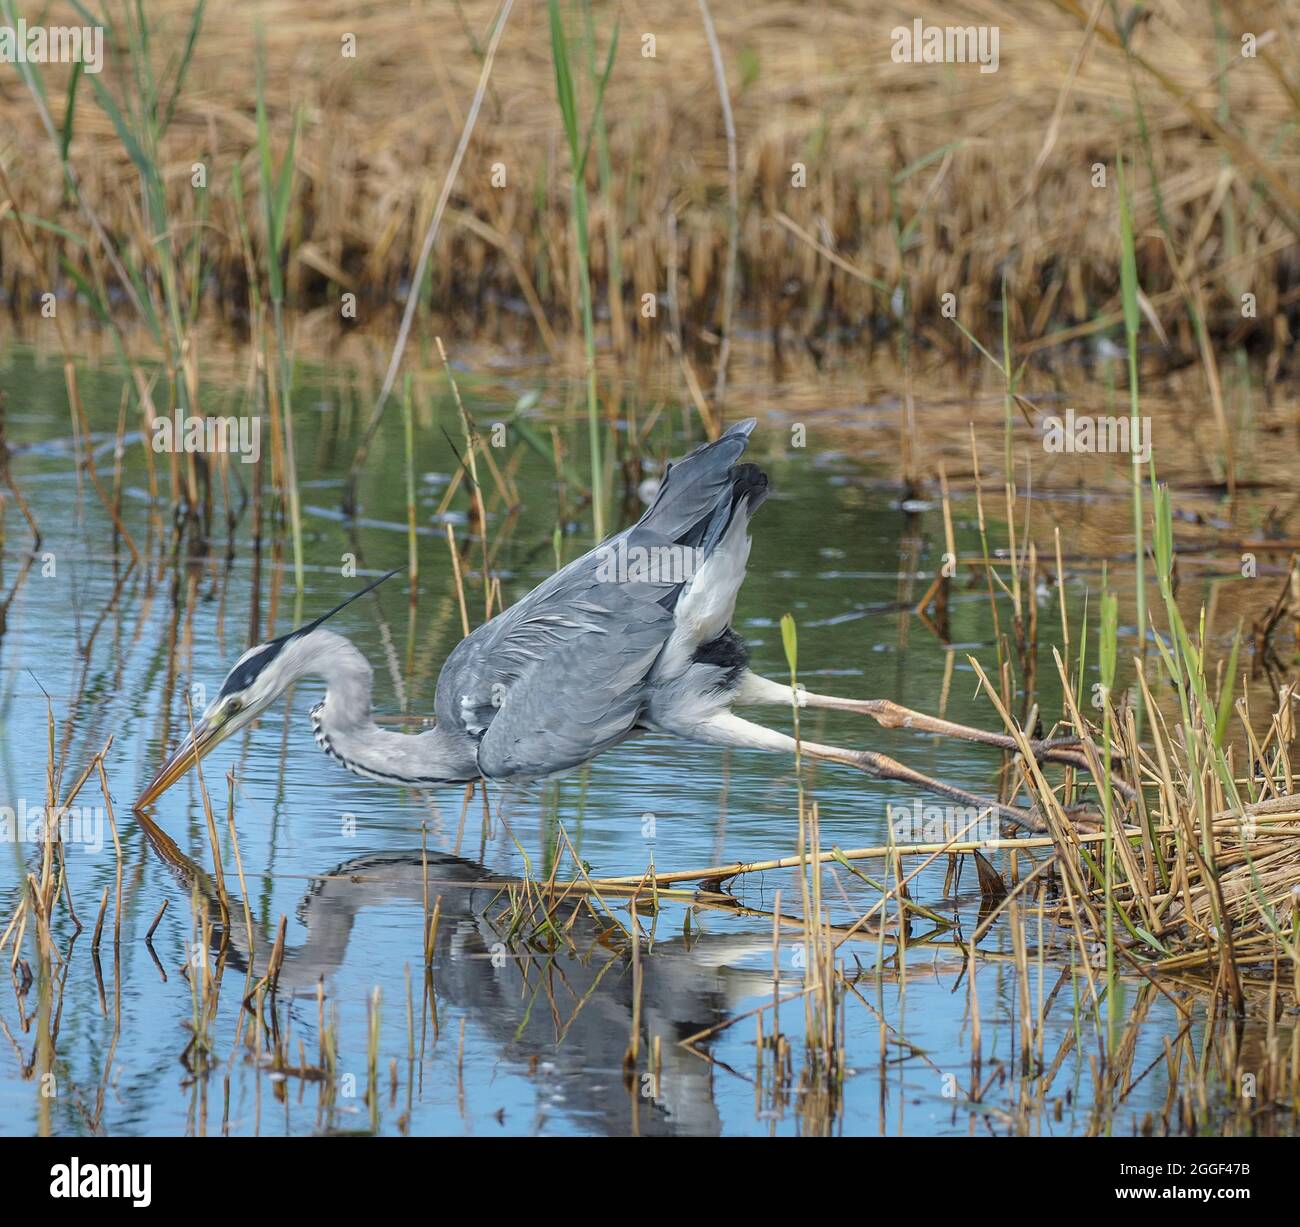 Heron diving after prey, Teifi Marshes, Wales Stock Photo